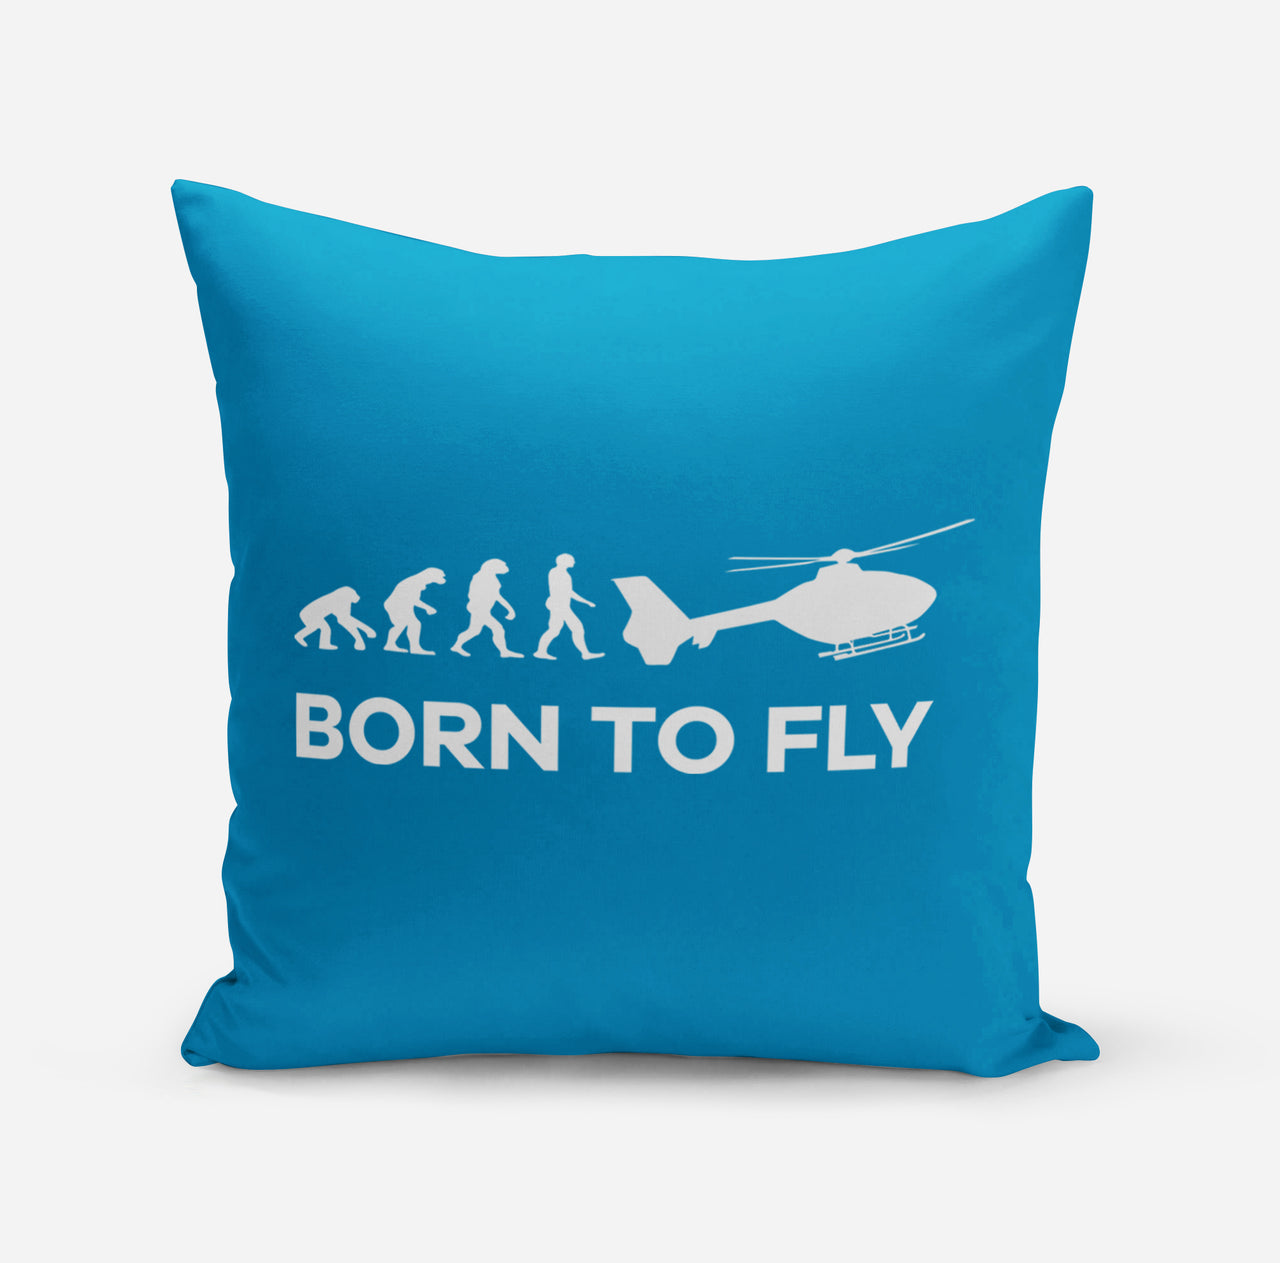 Born To Fly Helicopter Designed Pillows